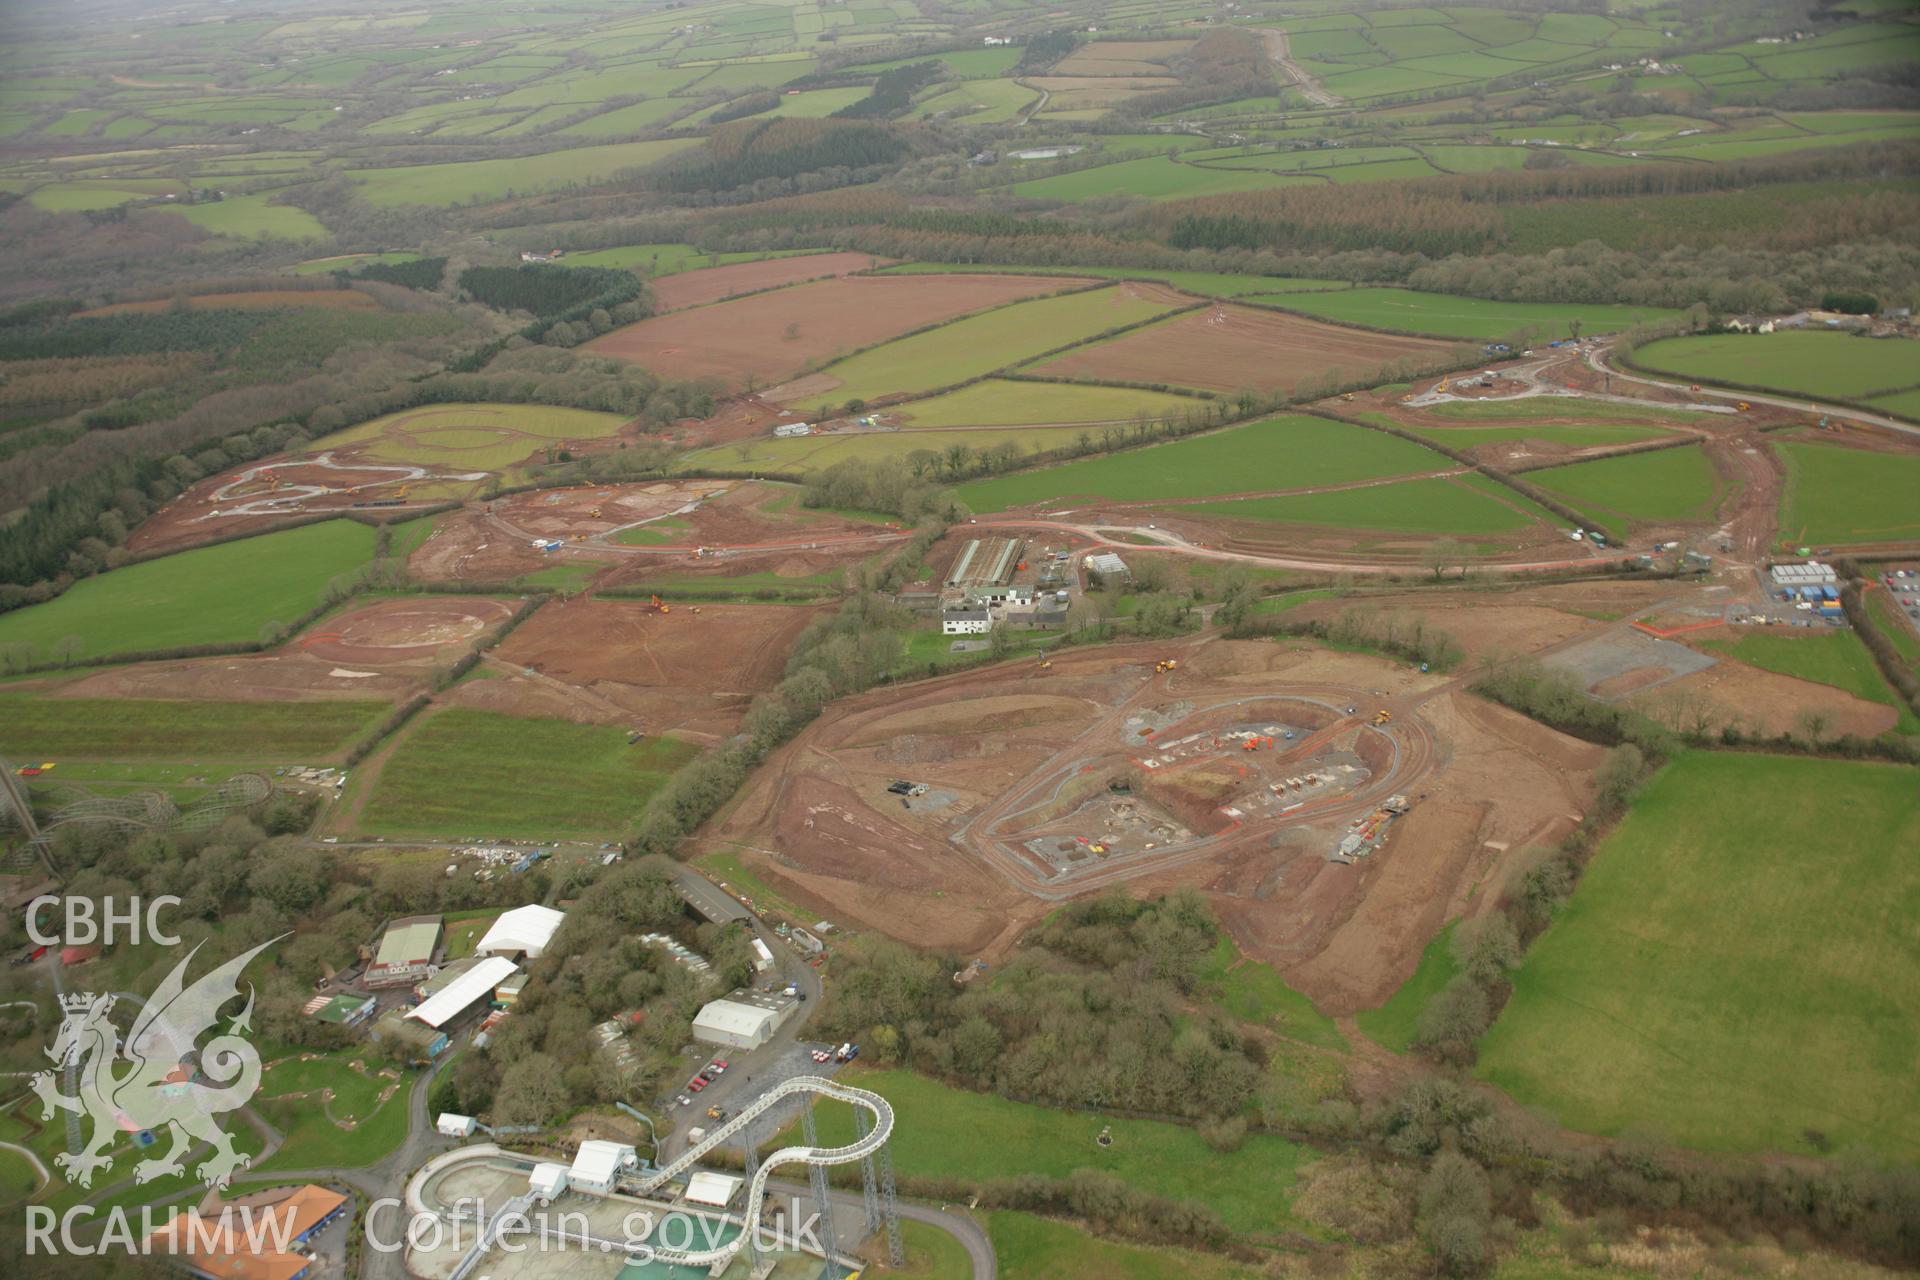 RCAHMW colour oblique aerial photograph of Bluestone Holiday Village, Narberth. Taken on 16 March 2007 by Toby Driver